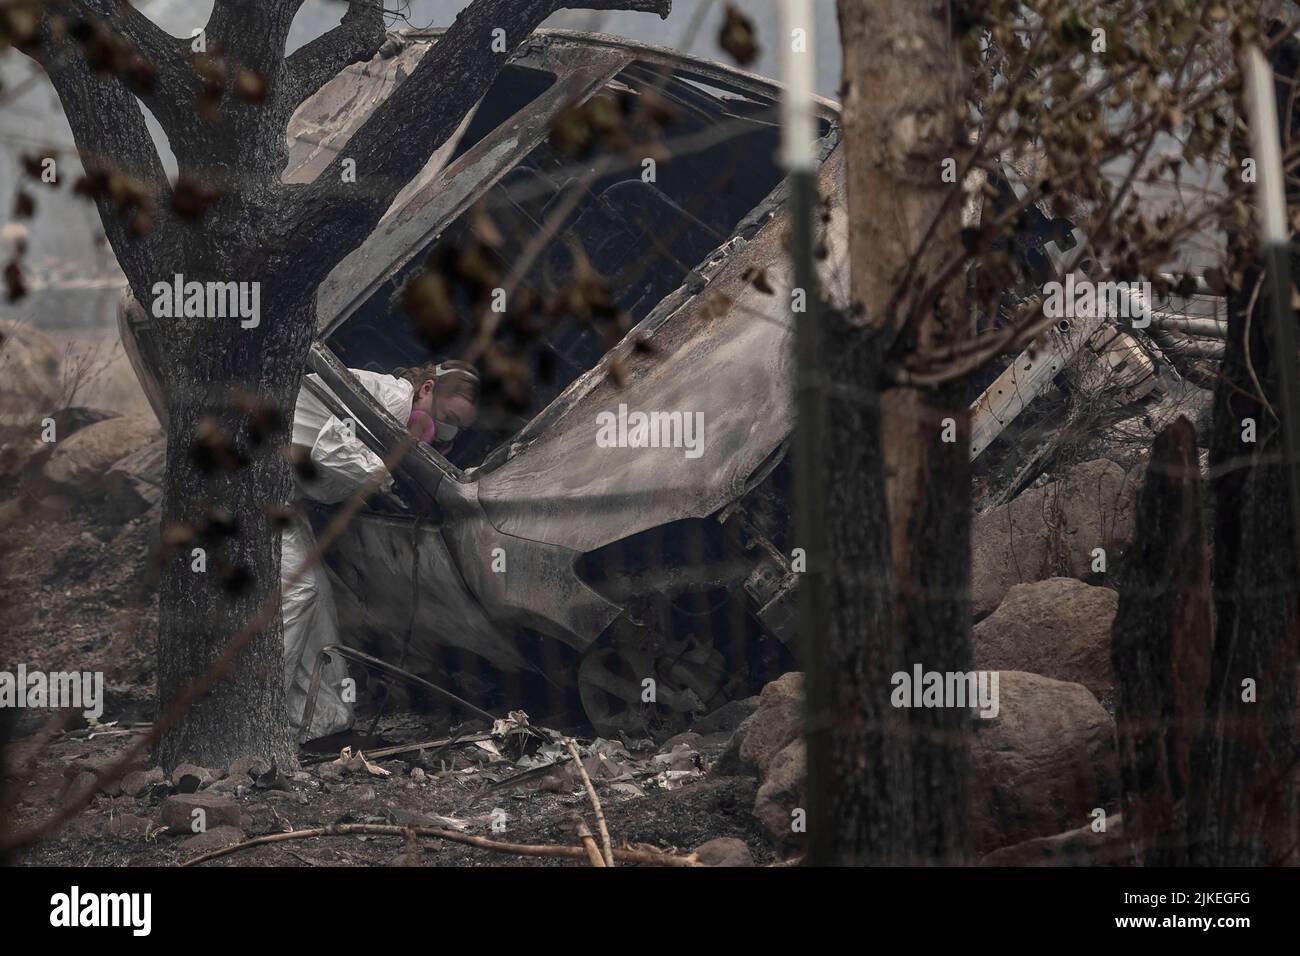 A forensic anthropologist looks for human remains in a damaged vehicle as the McKinney Fire burns near Yreka, California, U.S., August 1, 2022. REUTERS/Carlos Barria Stock Photo